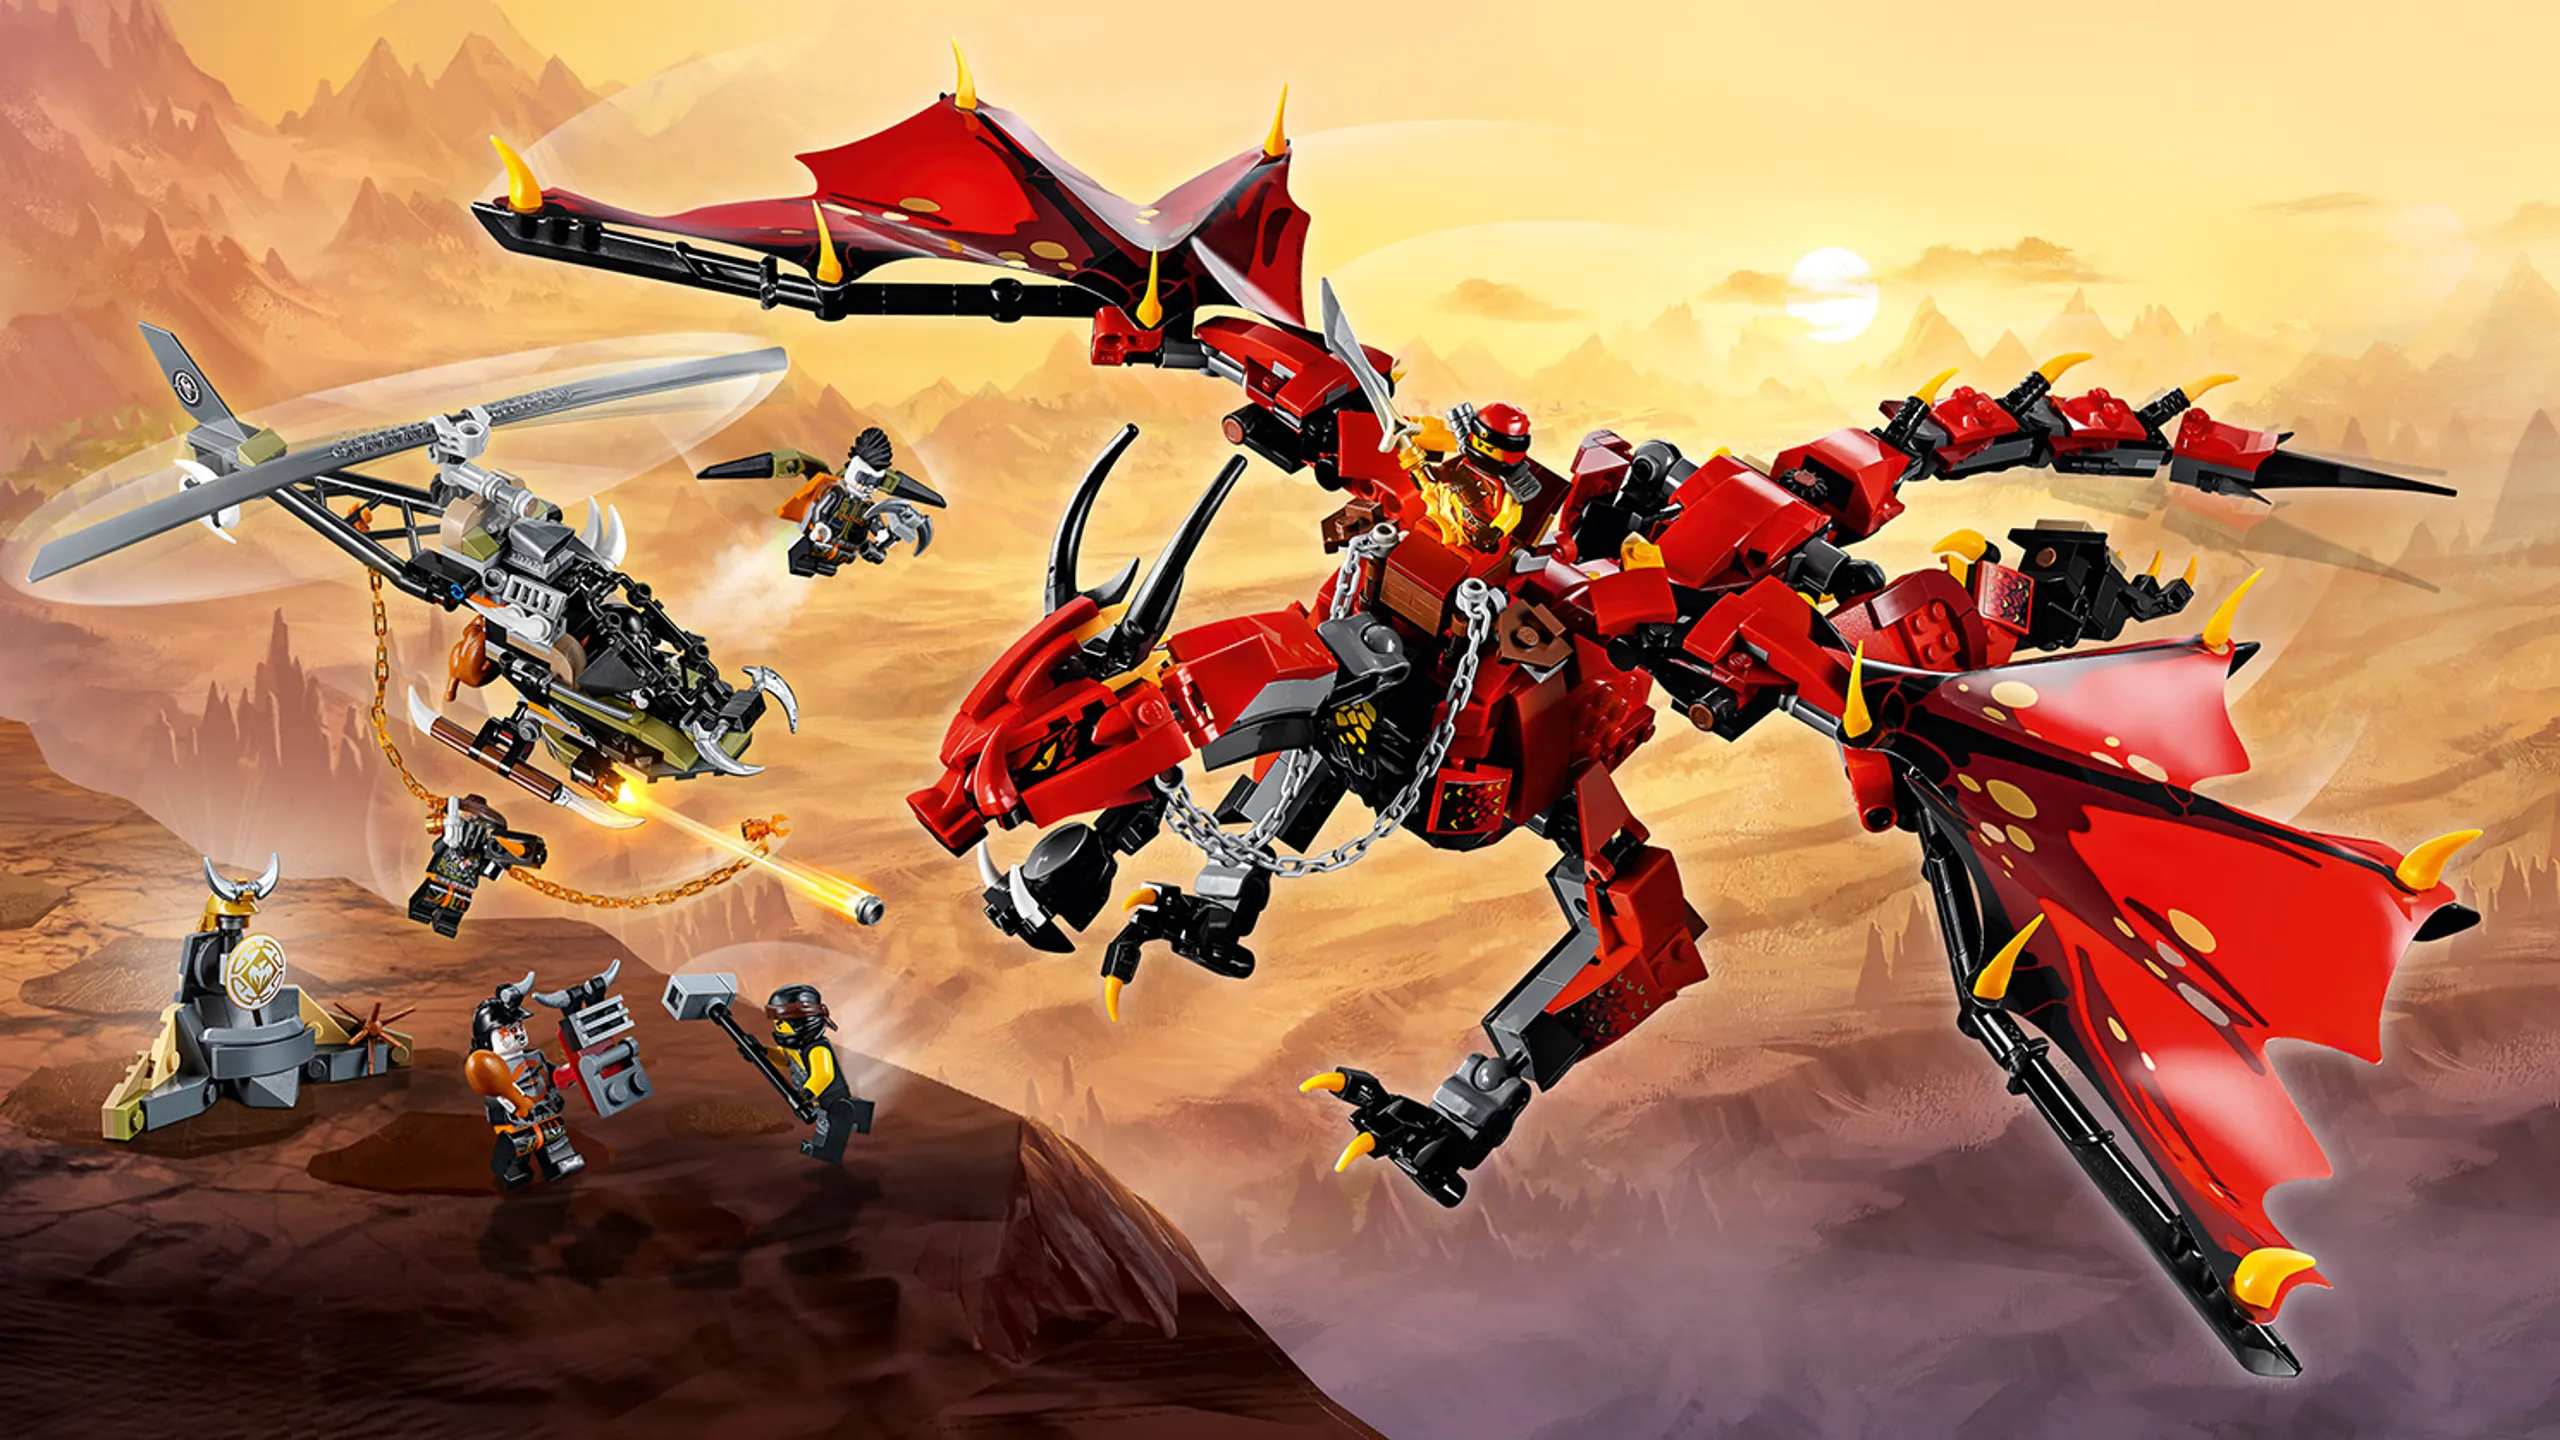 LEGO Ninjago - 70653 Firstbourne - Help Kai and Cole save Firstbourne, the mother of all dragons, from the Dragon Hunters!